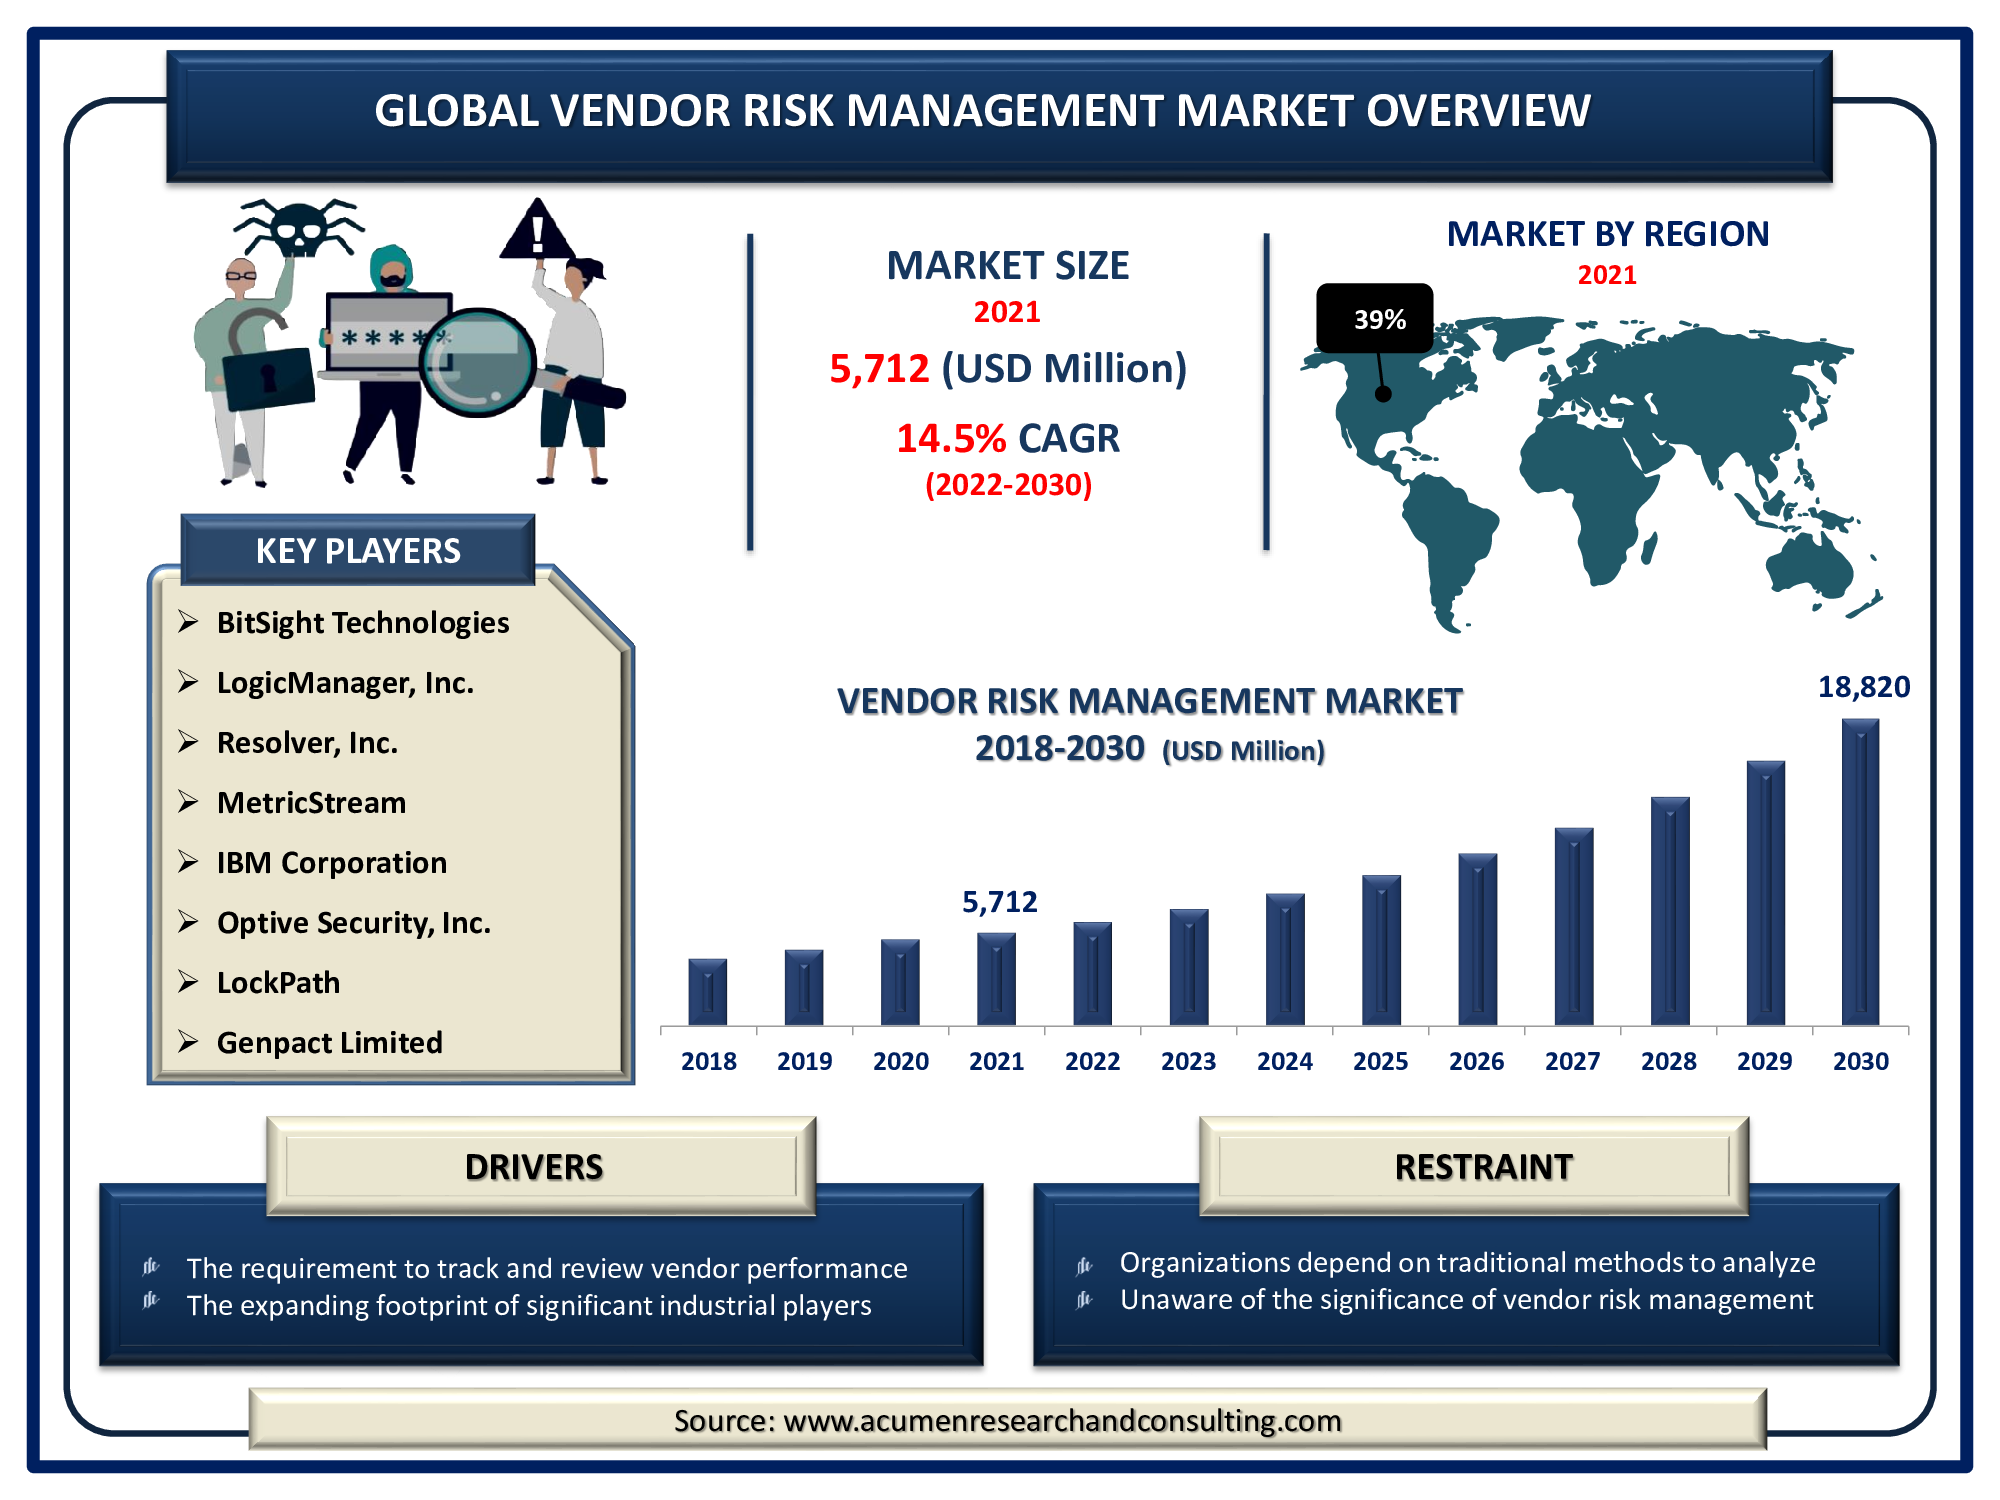 Vendor Risk Management Market is expected to reach USD 18,820 Mn by 2030 with a considerable CAGR of 14.5%